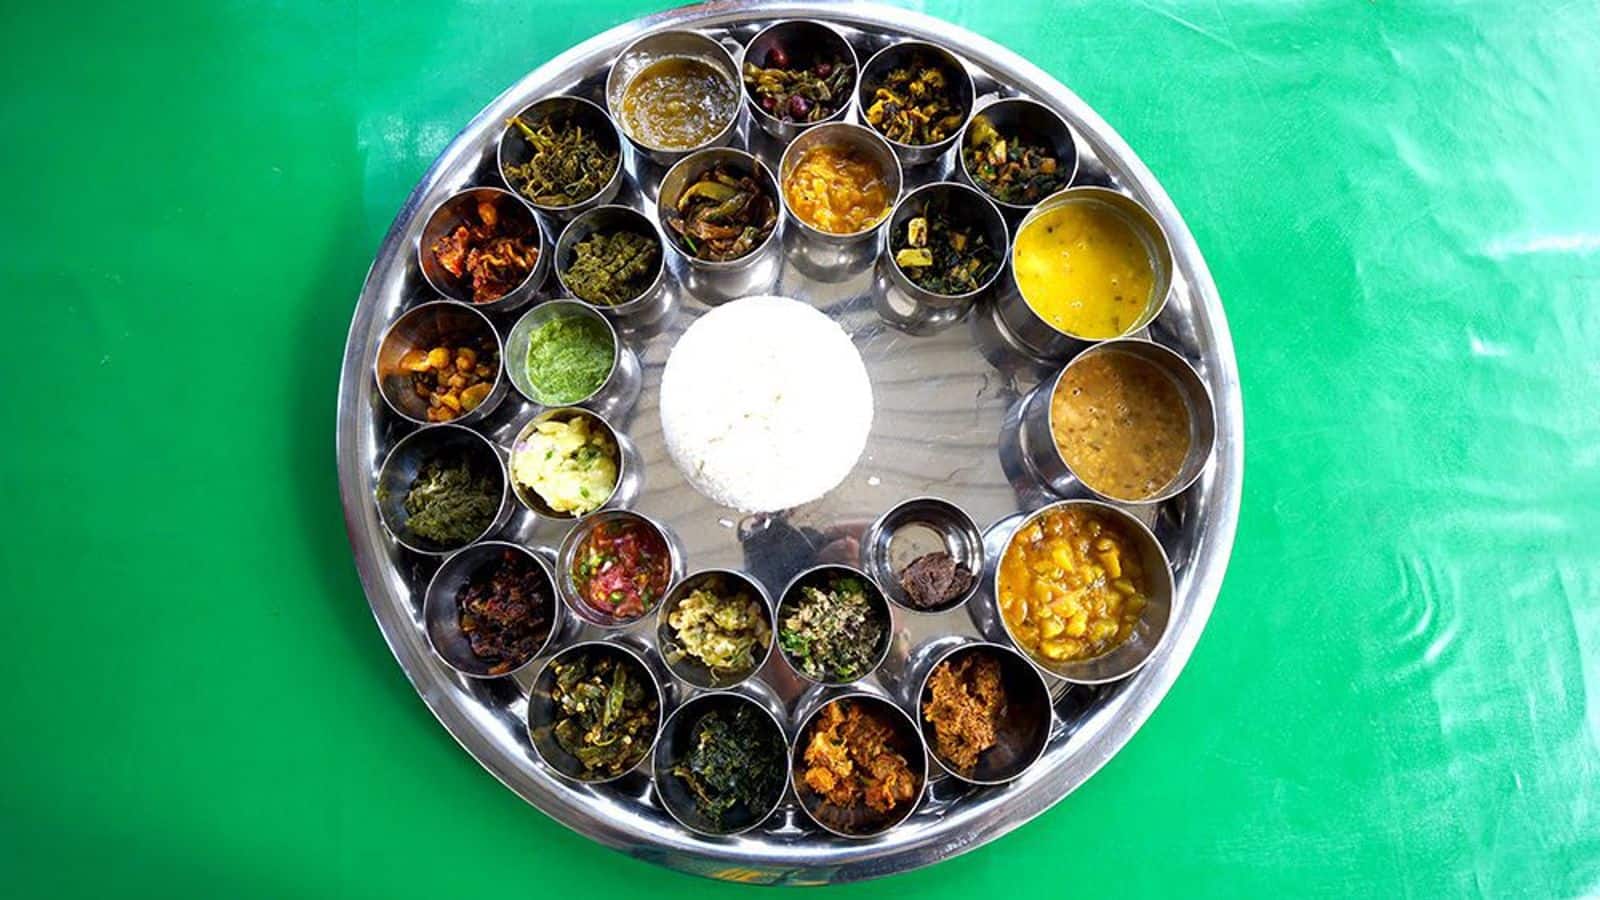 Gorge on these Assamese vegetarian delights